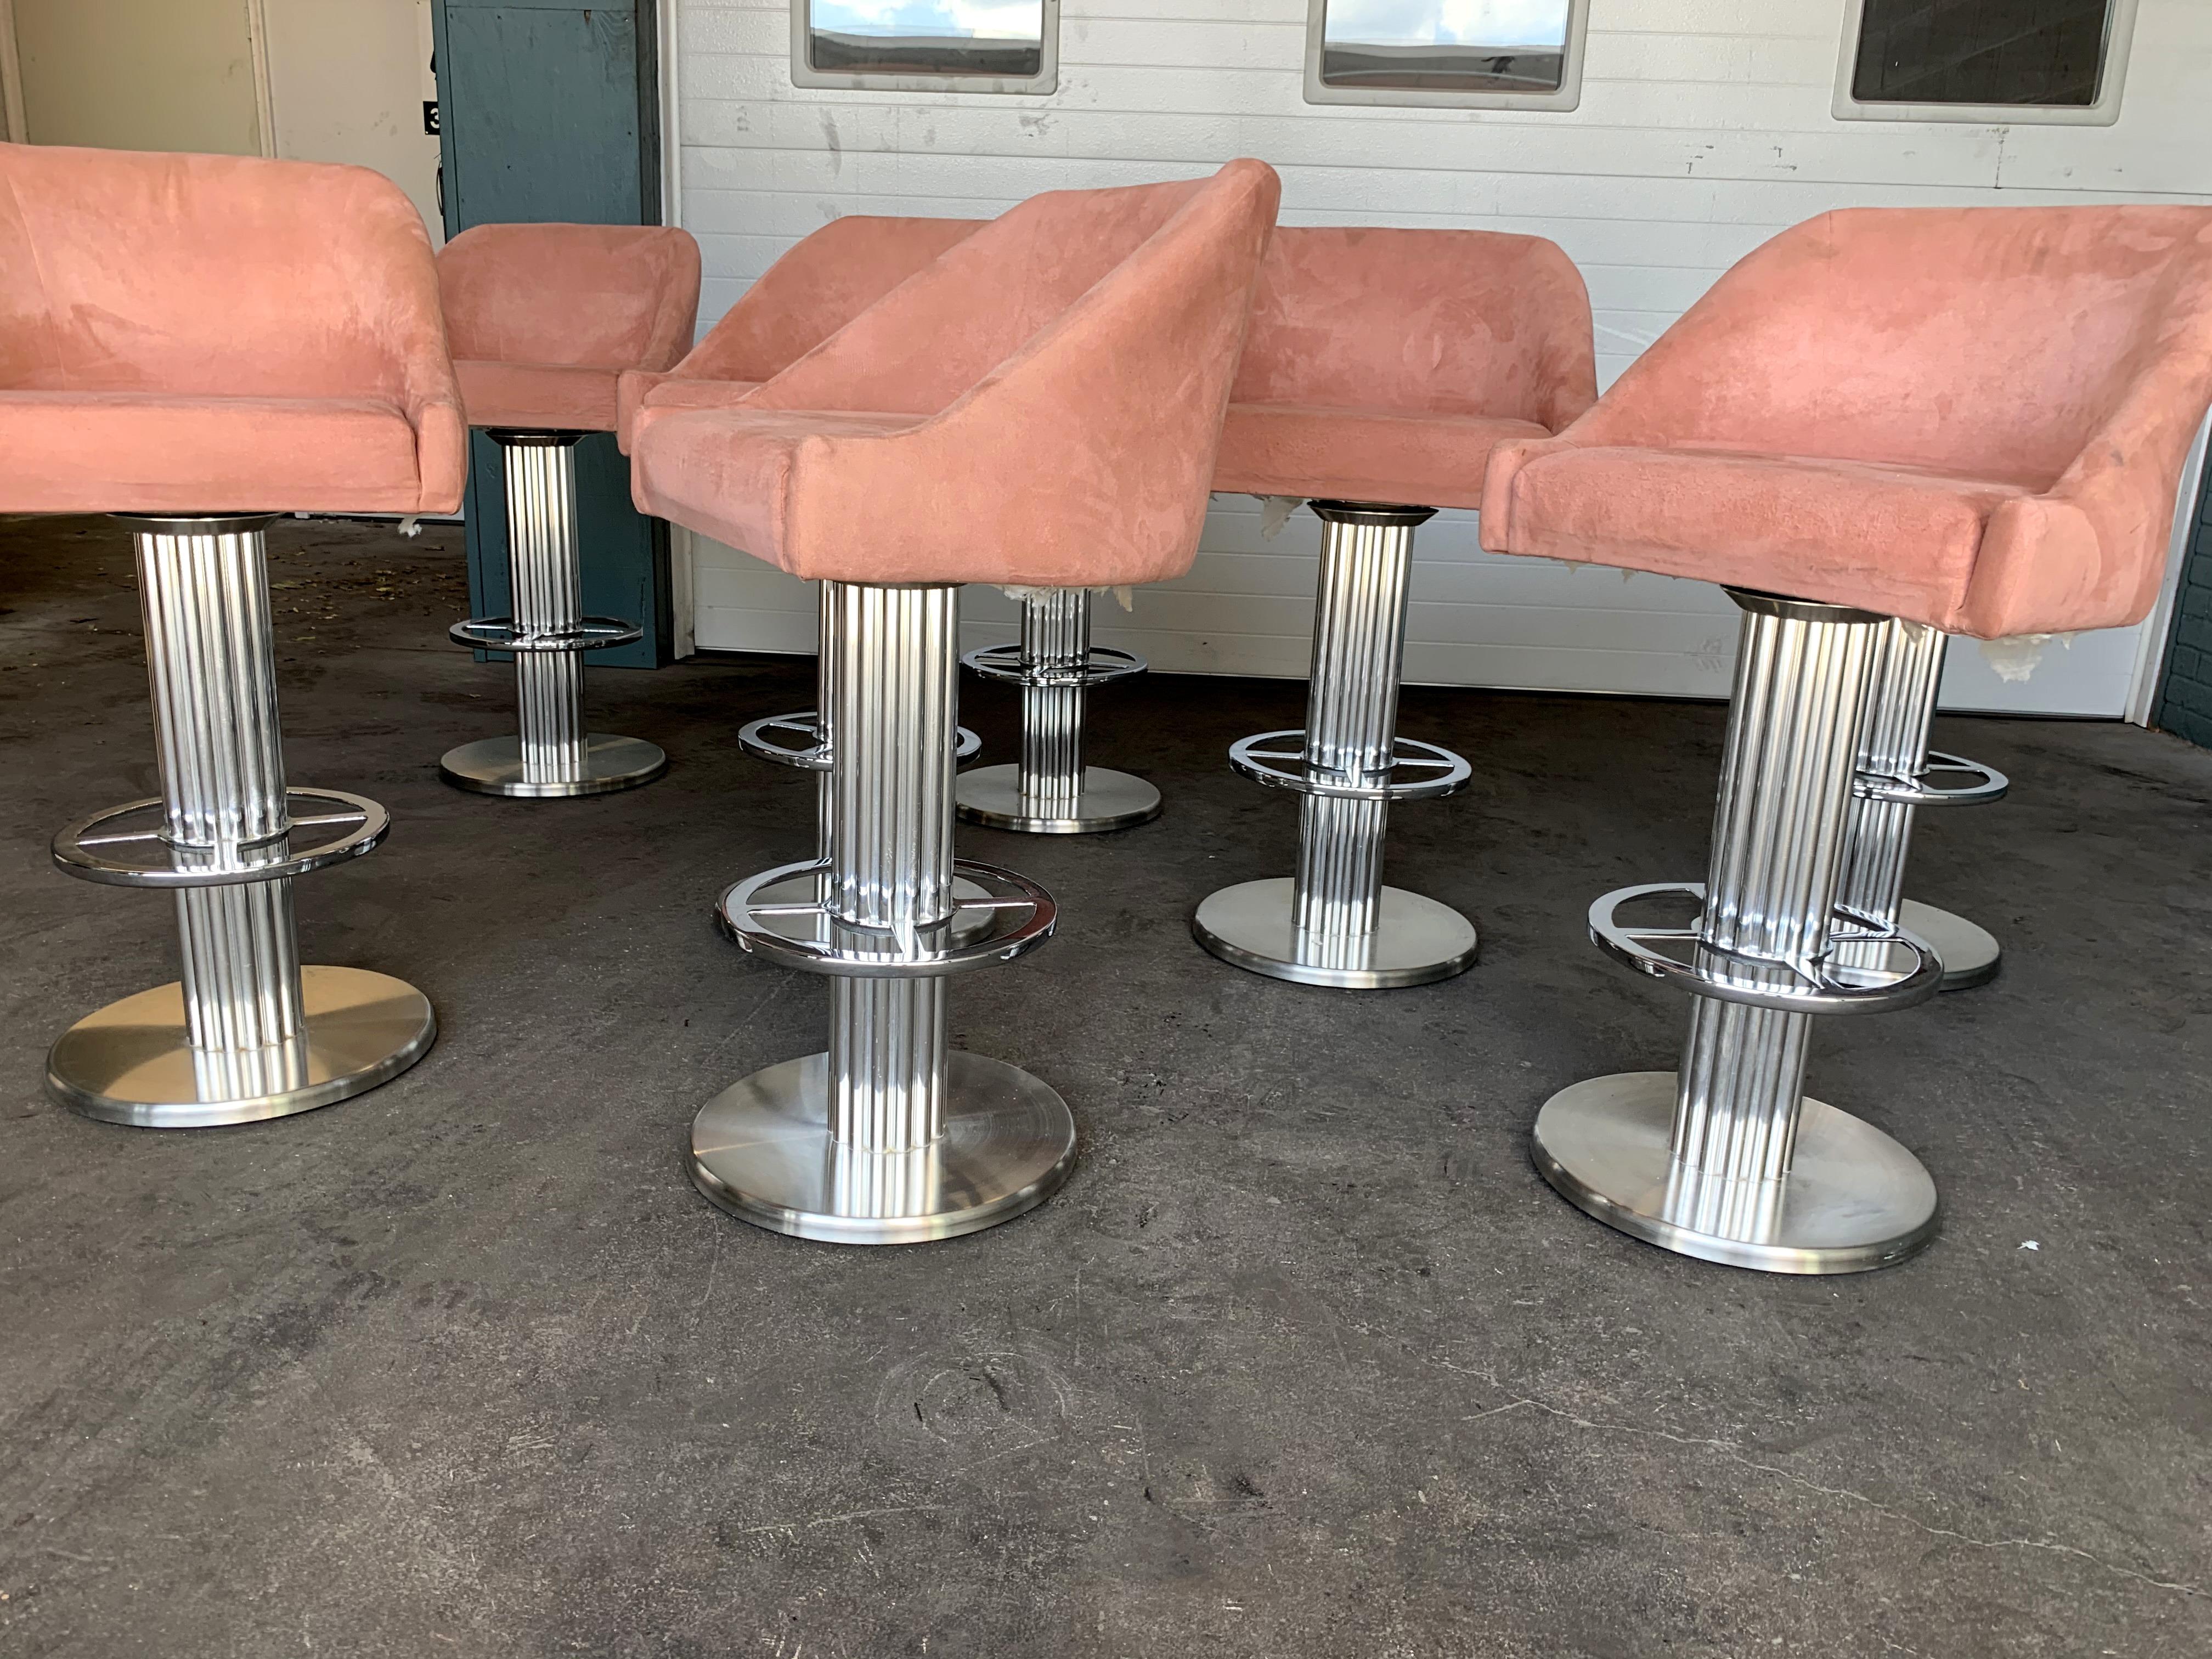 Stools sold individually

Looking to create a bar in your home or business?
The most beautiful set of design for Leisure bar stools out there. And there are 8 of them!
The deep blush/pink color of these is just delicious.
Minor wear on edge as